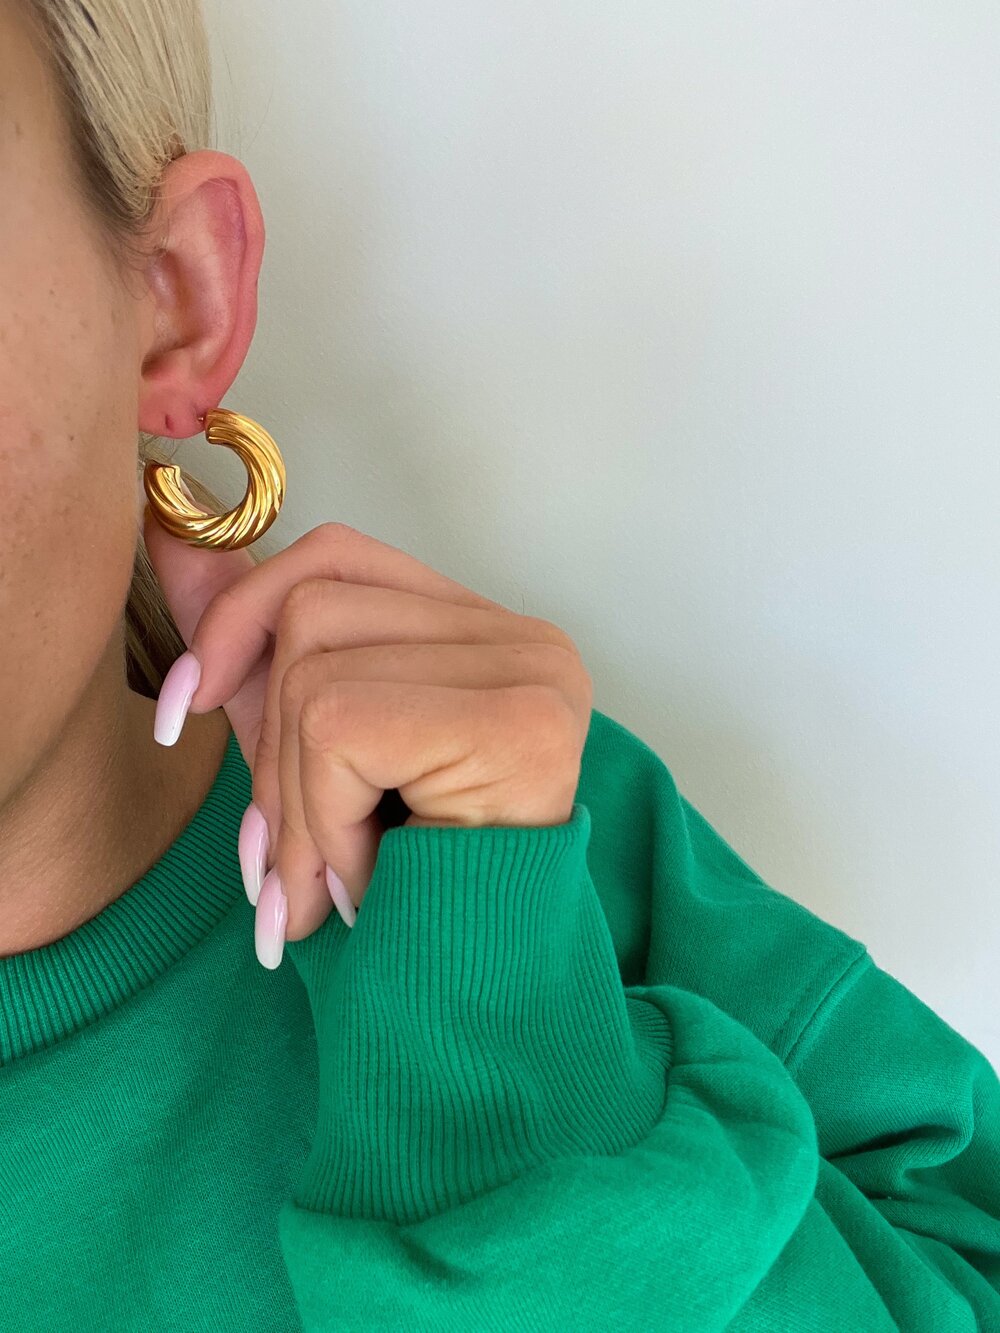 The Gold Thick Twist Hoops